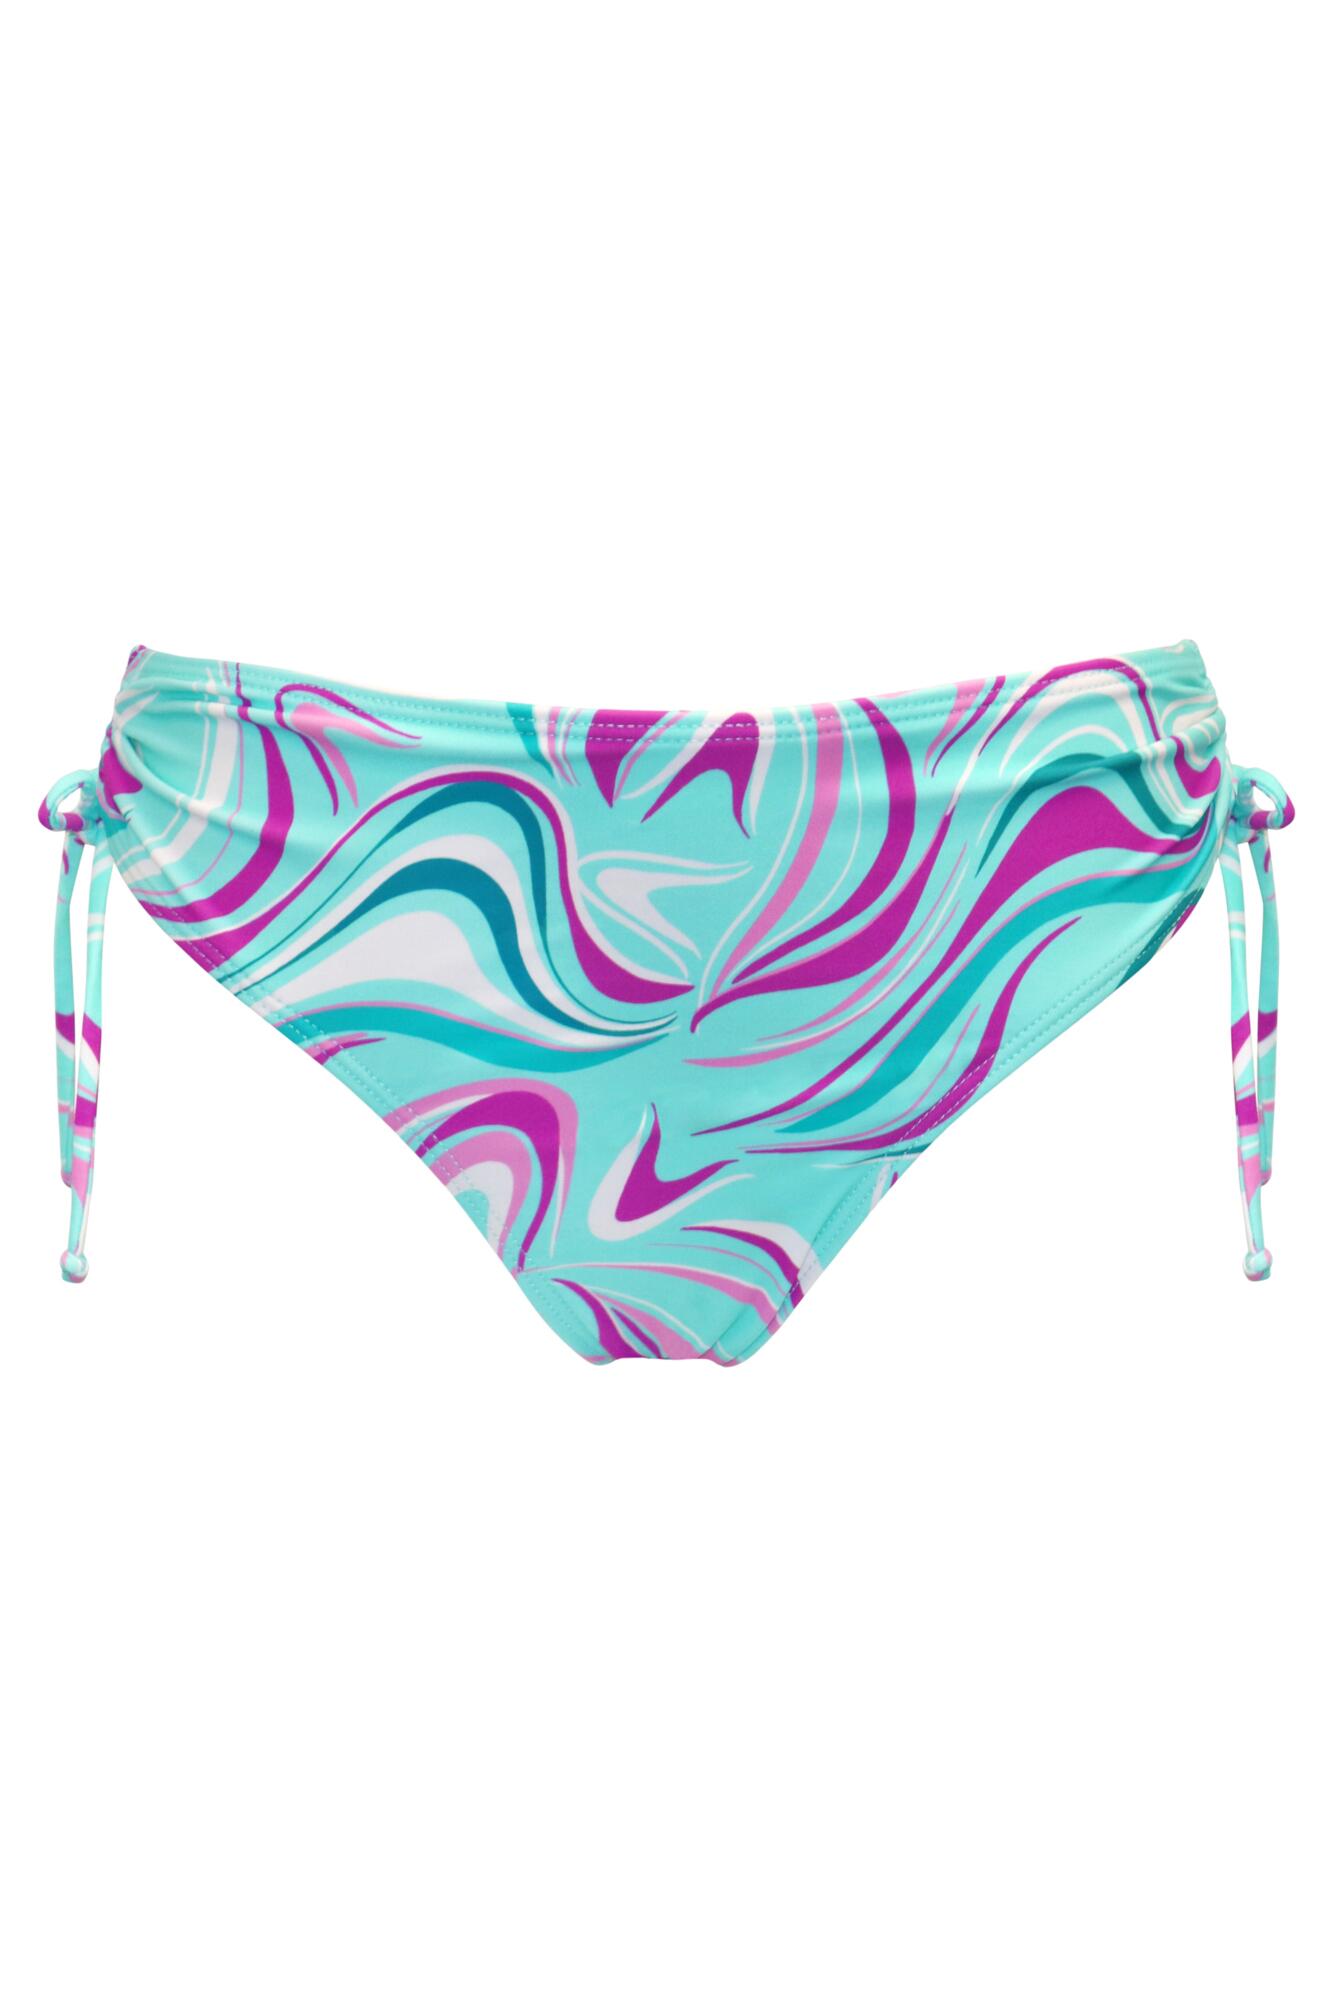 Carnival Adjustable Brief in Aquaburst | Pour Moi Clothing